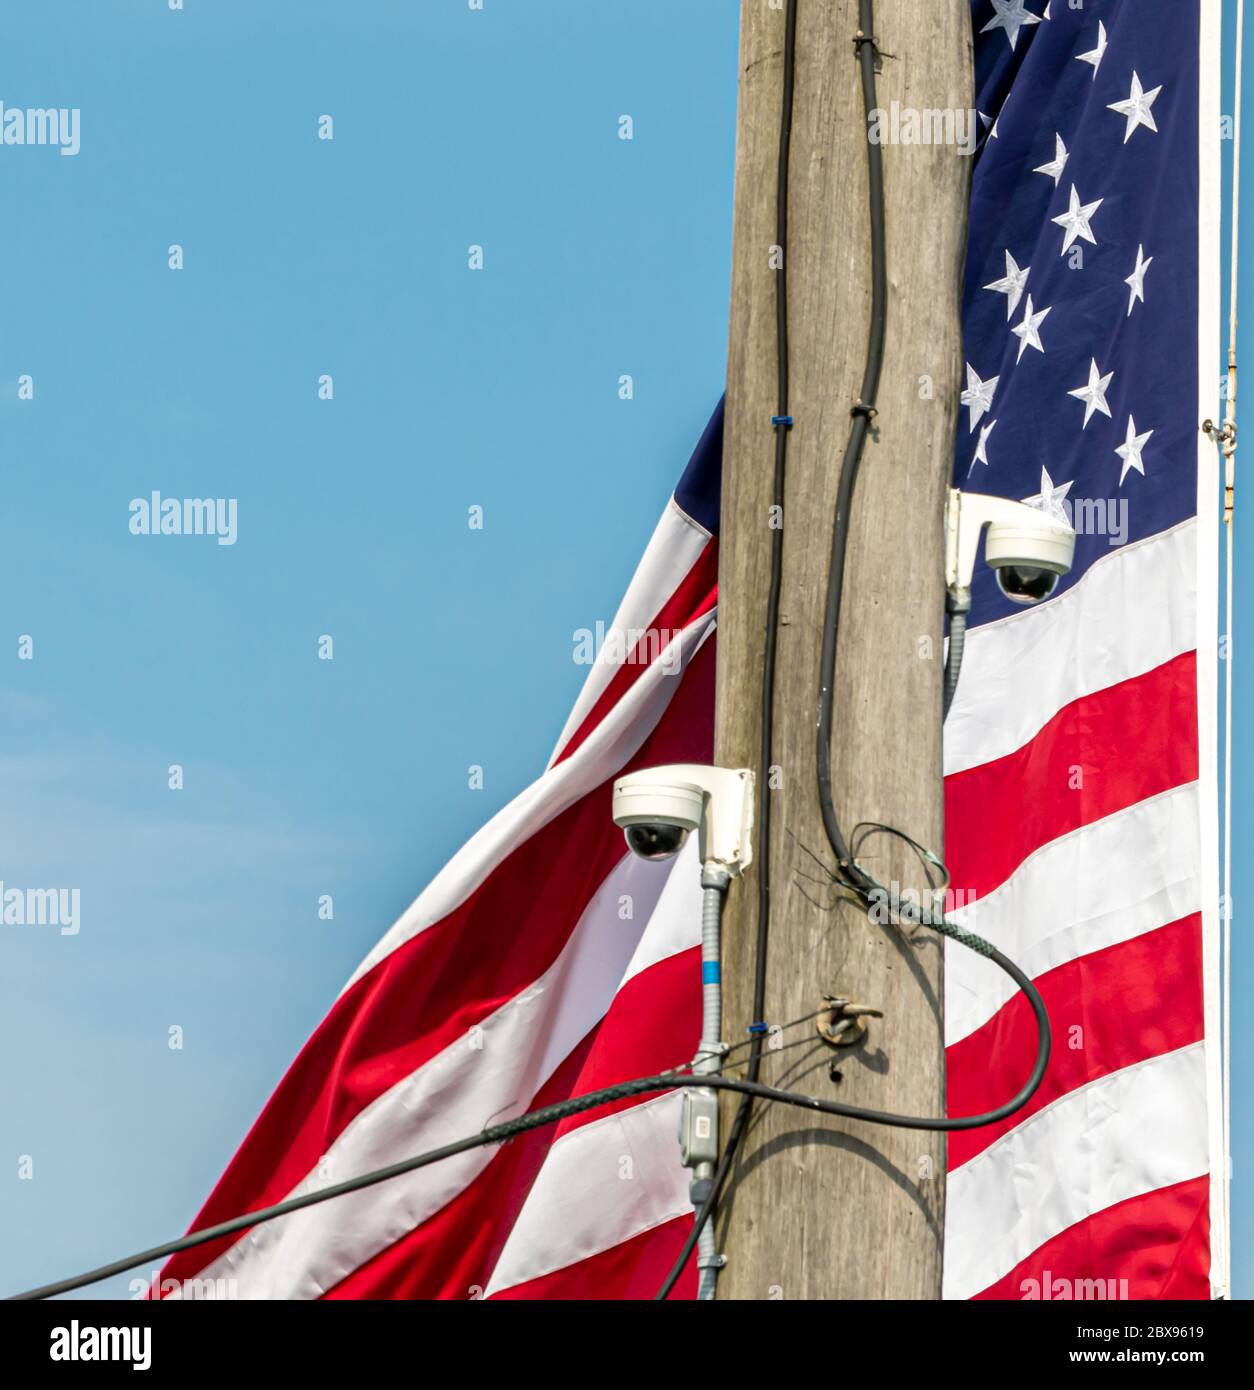 American flag with cameras mounted on a pole near by Stock Photo